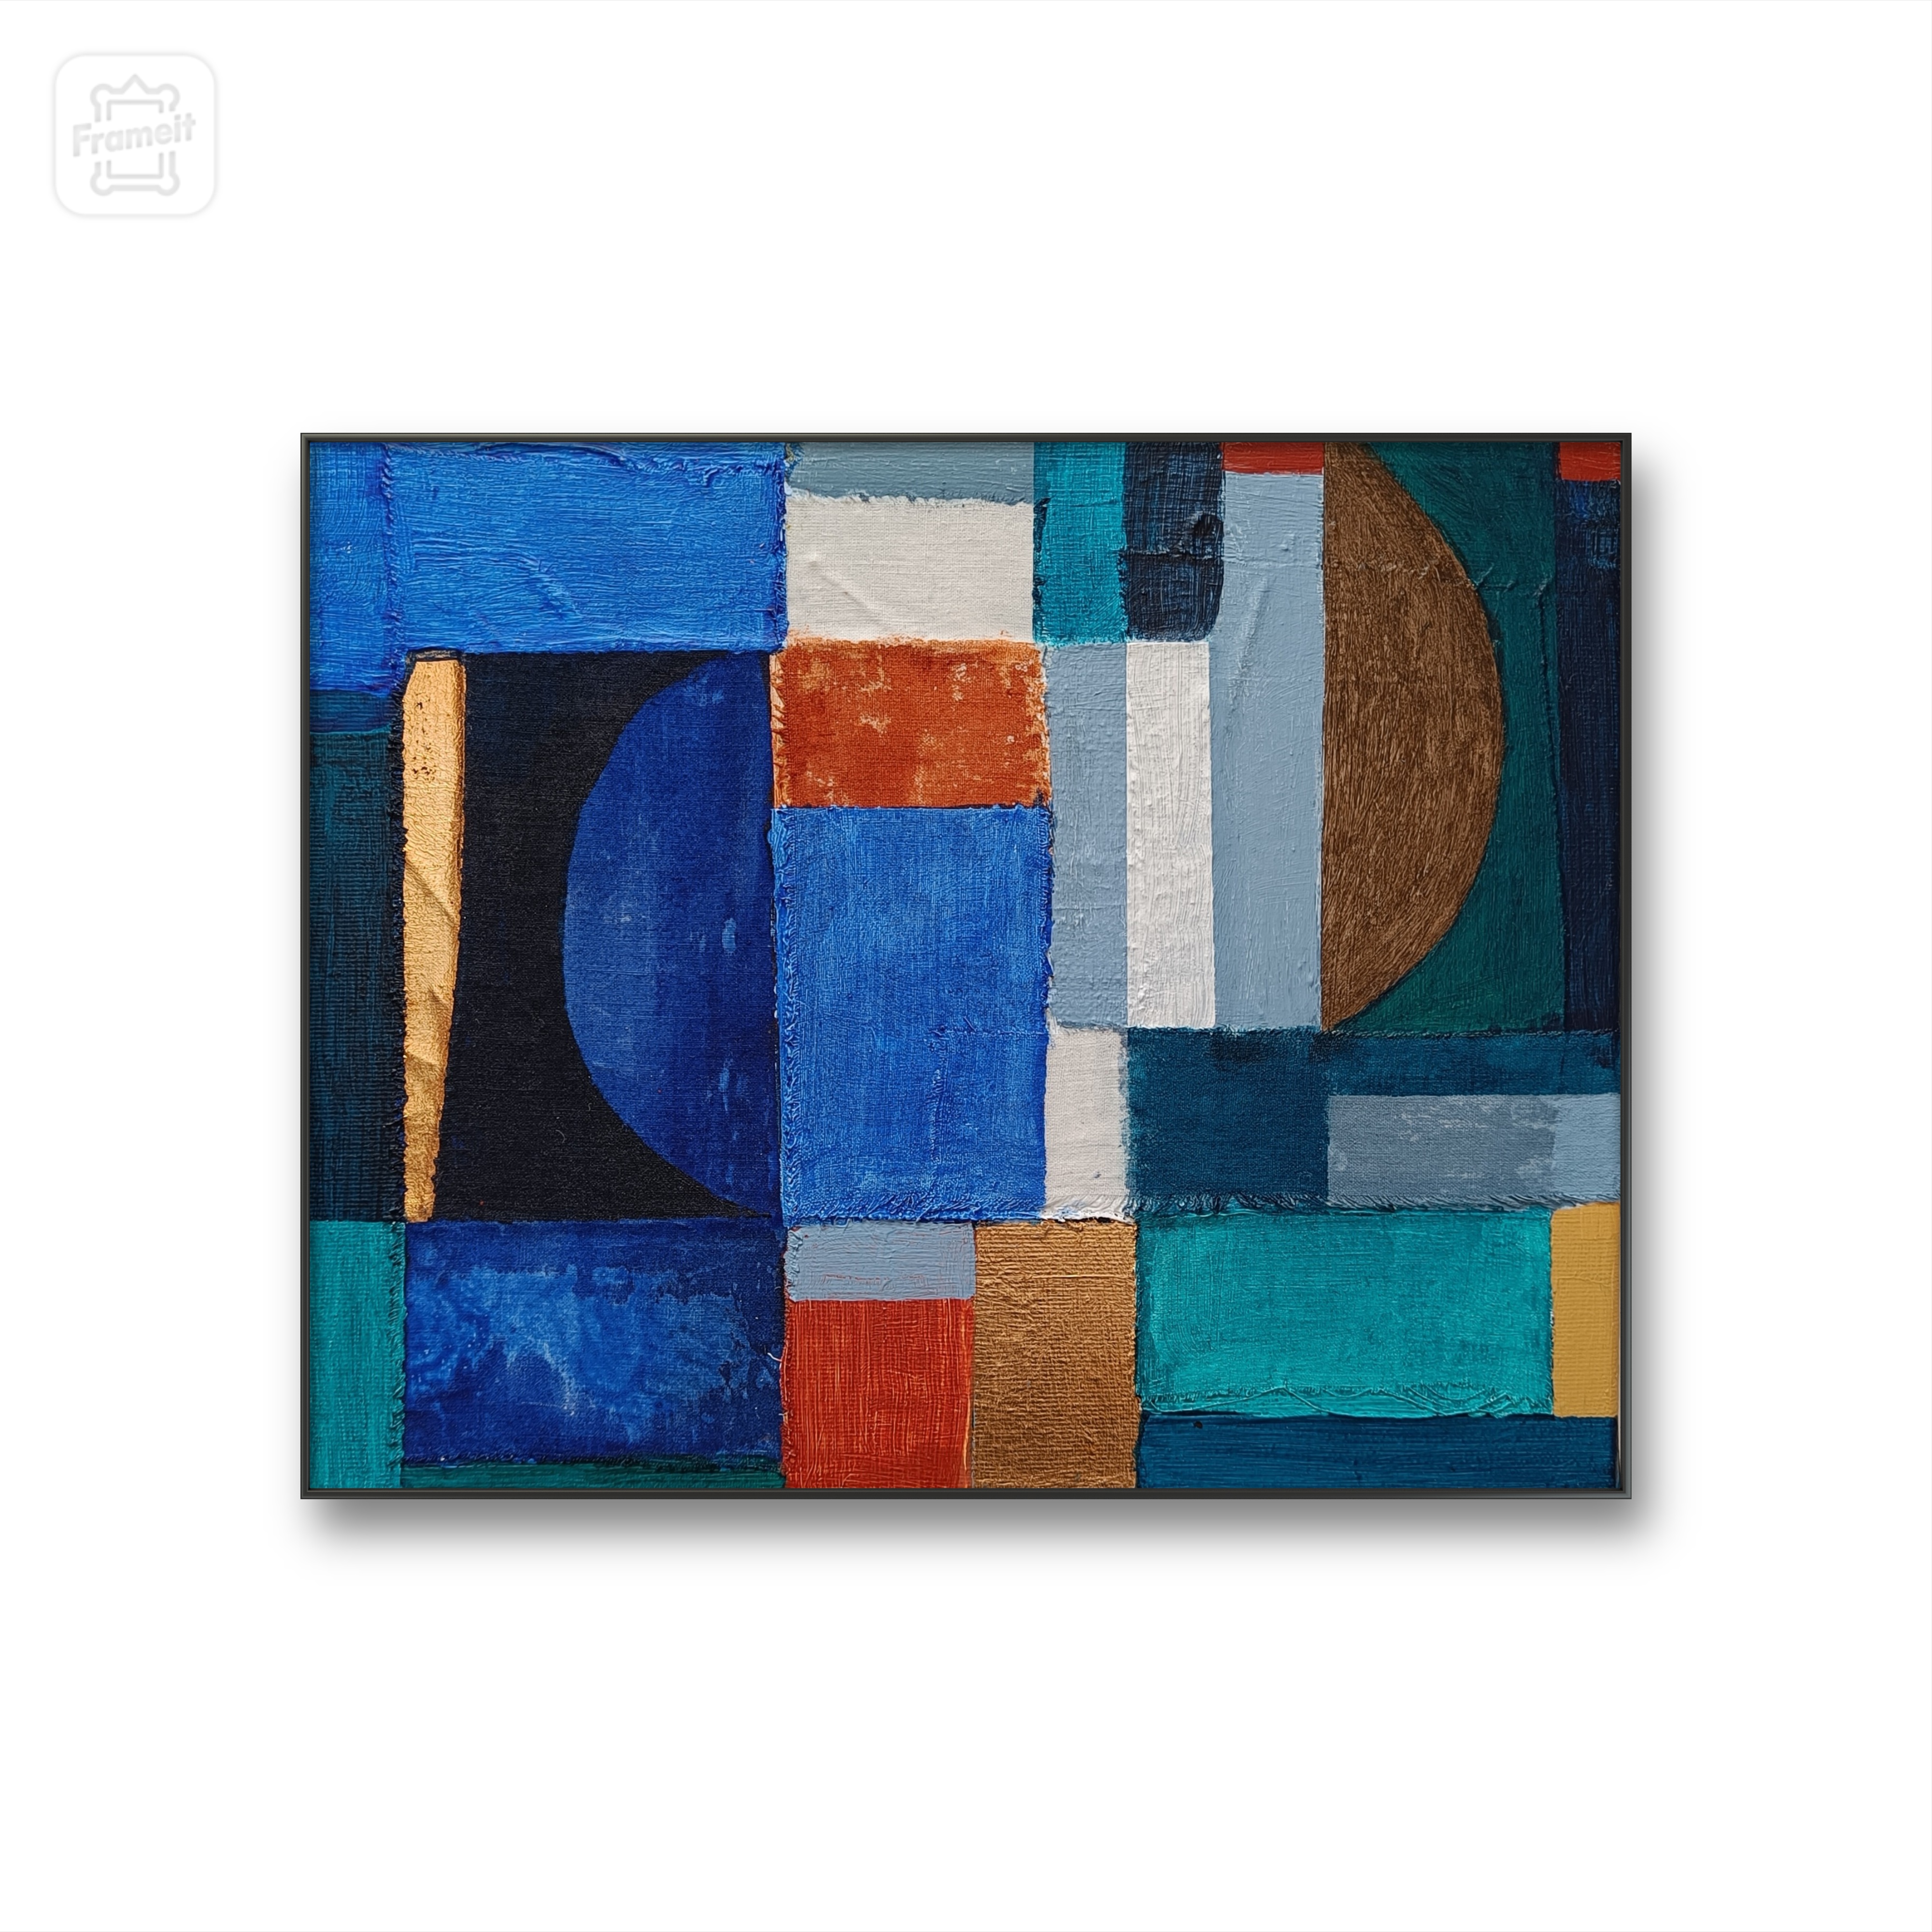 "Blue Moon", 28x35cm, painting on canvas, example of framing